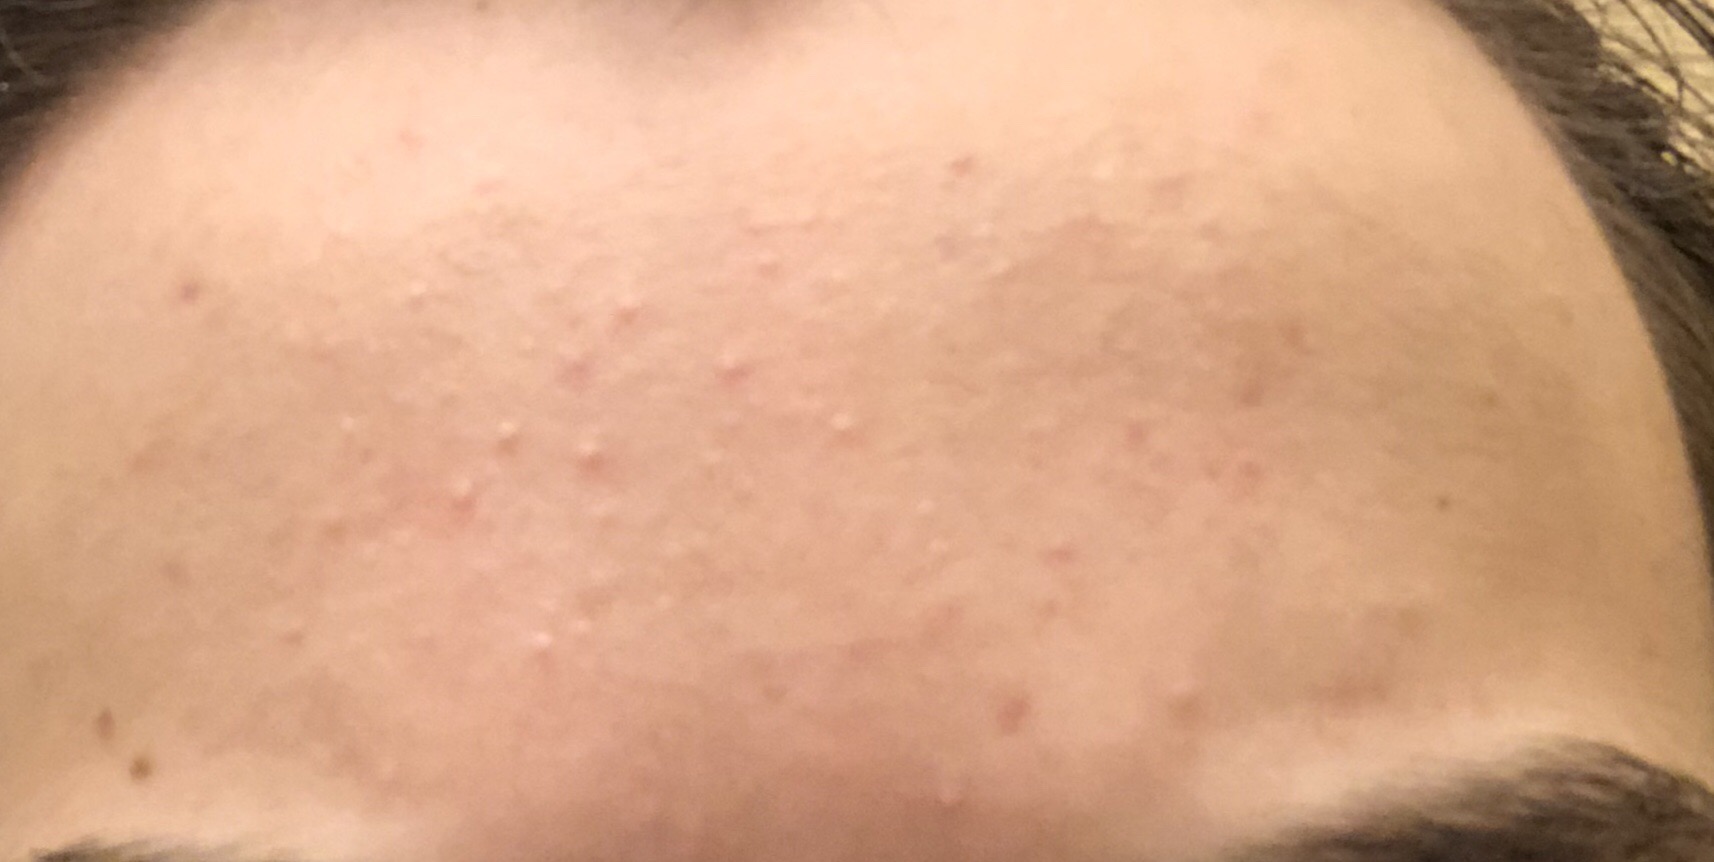 Very Small Forehead Bumps General Acne Discussion